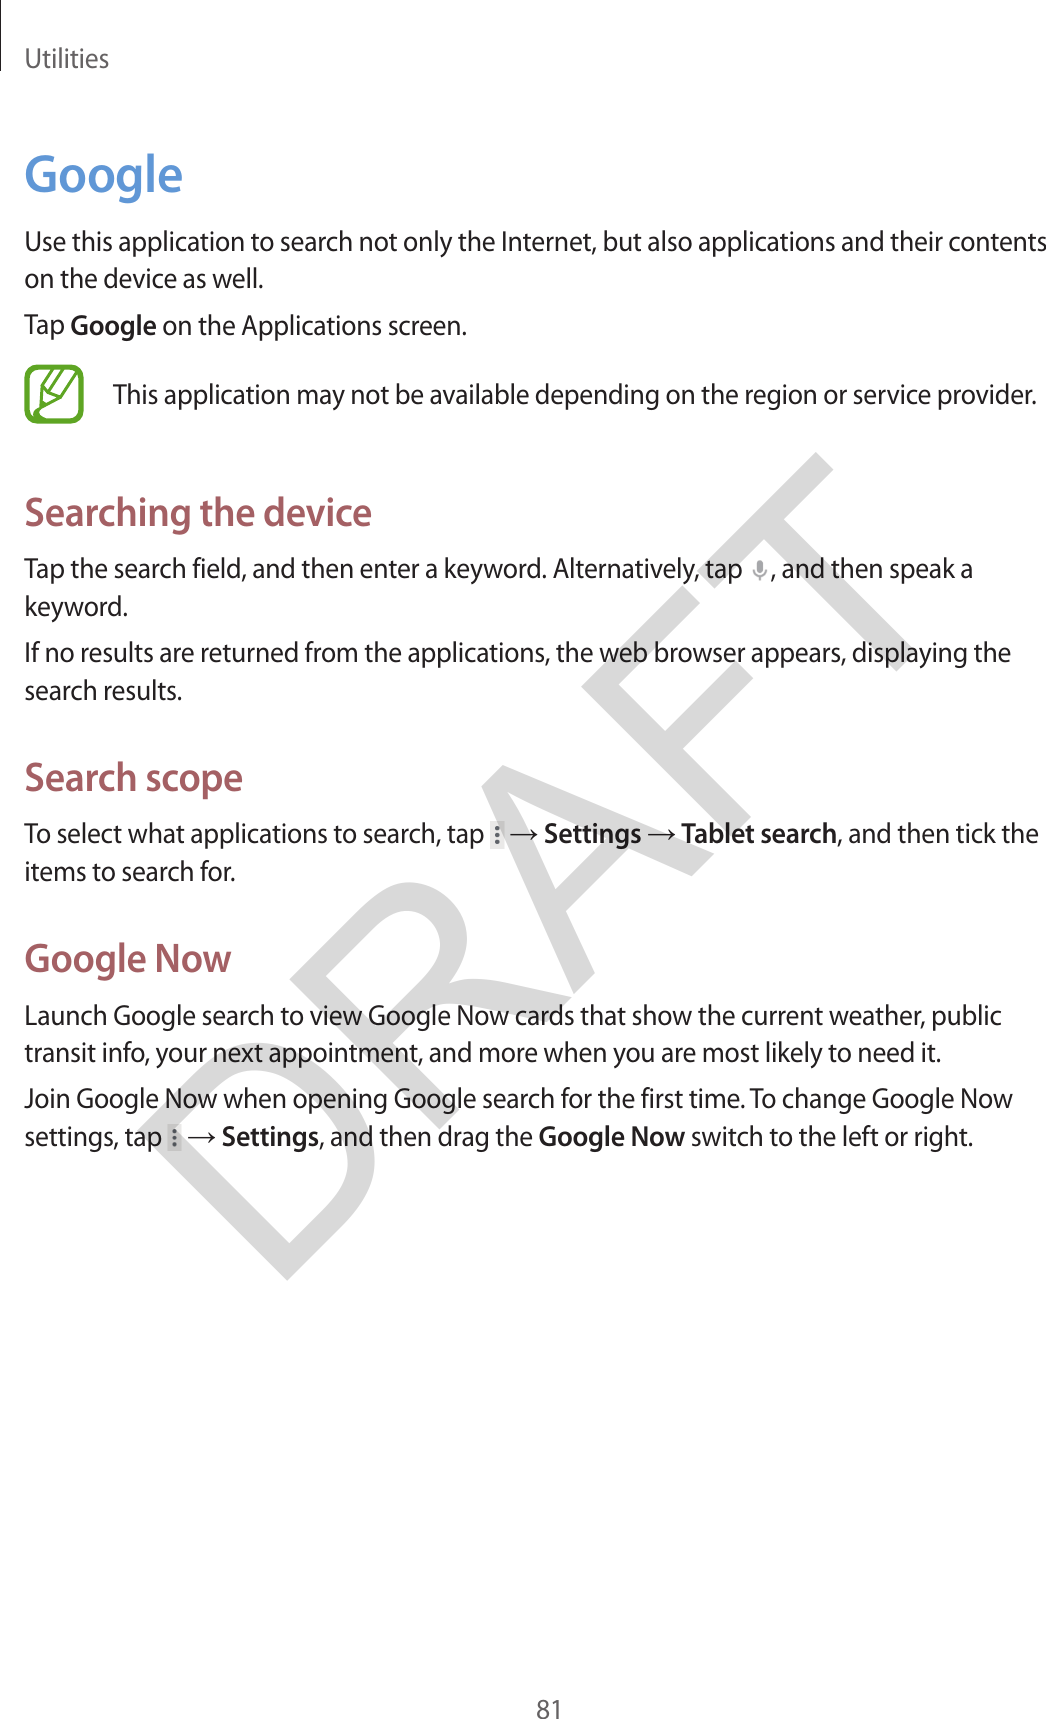 Utilities81GoogleUse this application to search not only the Internet, but also applications and their contents on the device as well.Tap Google on the Applications screen.This application may not be available depending on the region or service provider.Searching the deviceTap the search field, and then enter a keyword. Alternatively, tap  , and then speak a keyword.If no results are returned from the applications, the web browser appears, displaying the search results.Search scopeTo select what applications to search, tap   → Settings → Tablet search, and then tick the items to search for.Google NowLaunch Google search to view Google Now cards that show the current weather, public transit info, your next appointment, and more when you are most likely to need it.Join Google Now when opening Google search for the first time. To change Google Now settings, tap   → Settings, and then drag the Google Now switch to the left or right.DRAFT